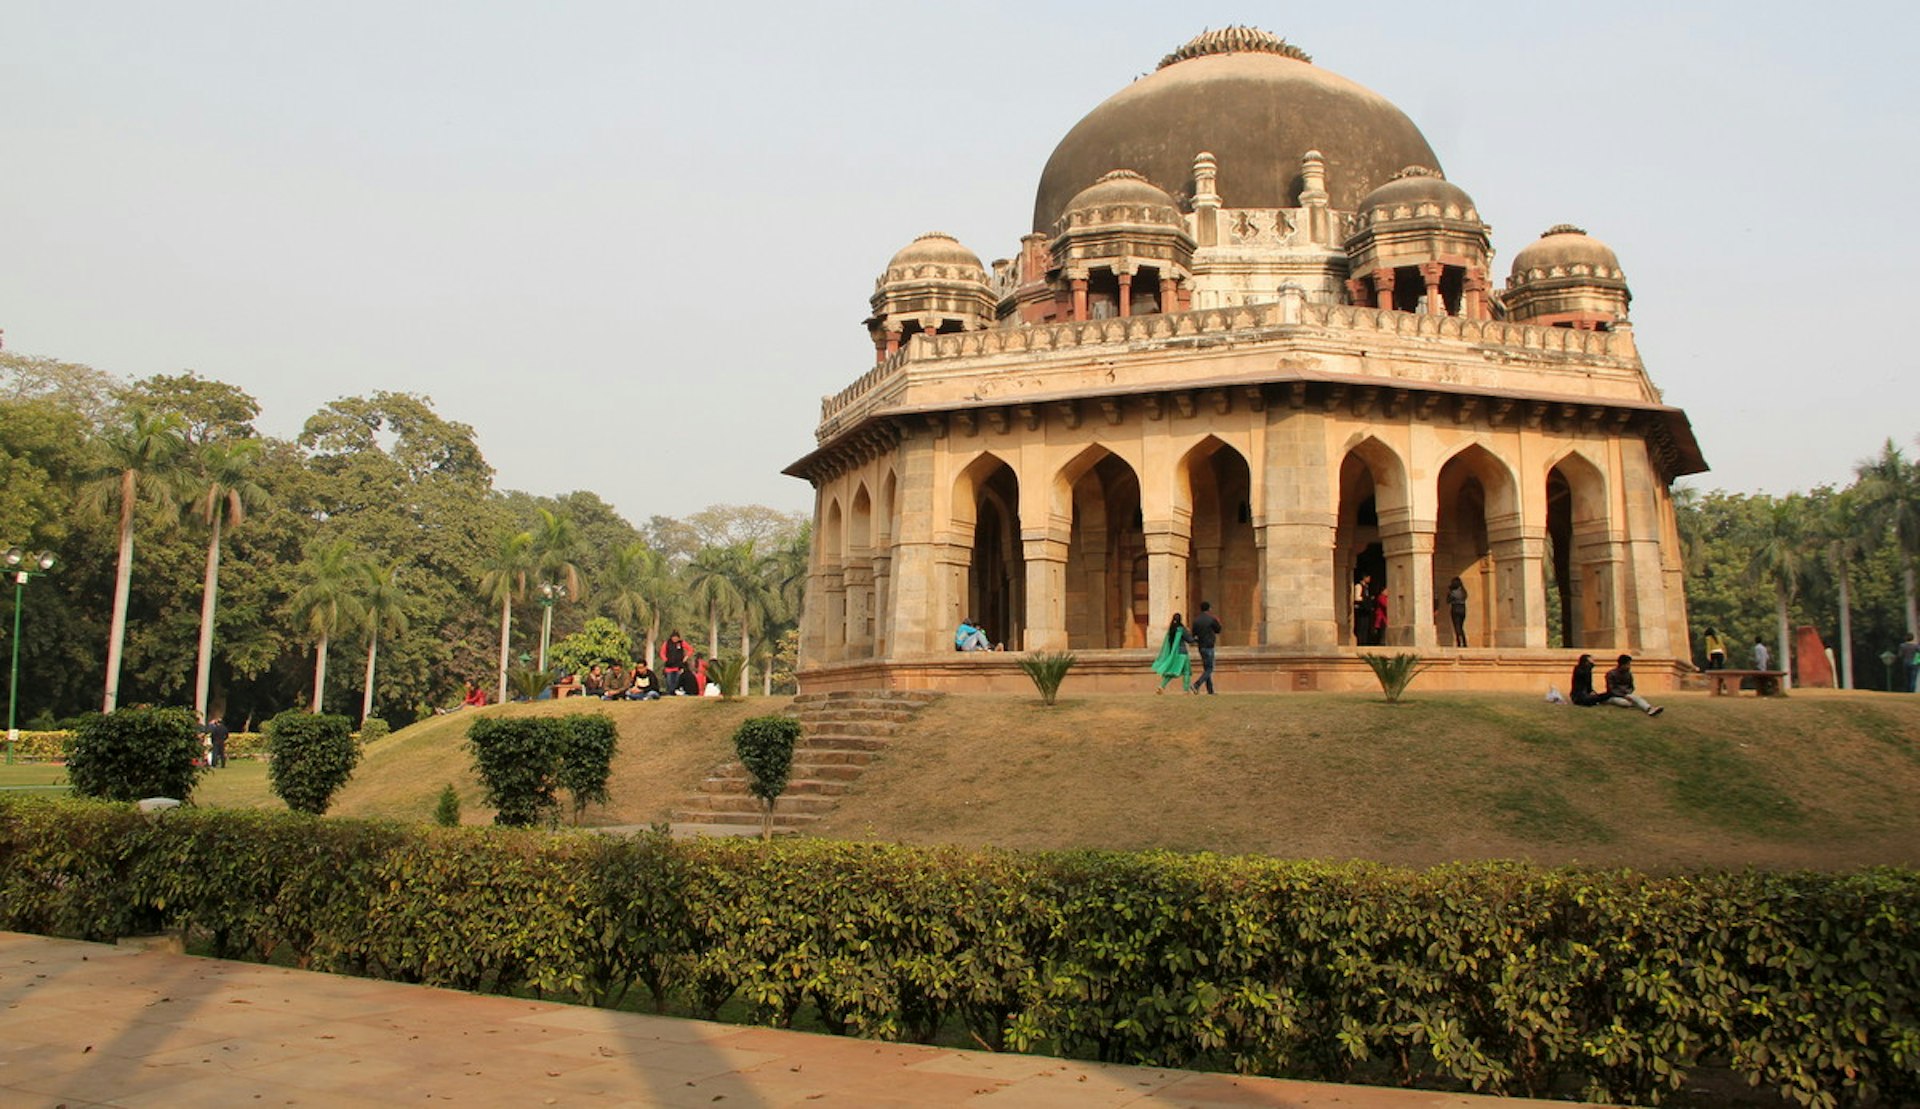 The last resting place of Mohammed Shah Sayyid at the Lodi Gardens © Puneeting Kuar Sidhu / Lonely Planet